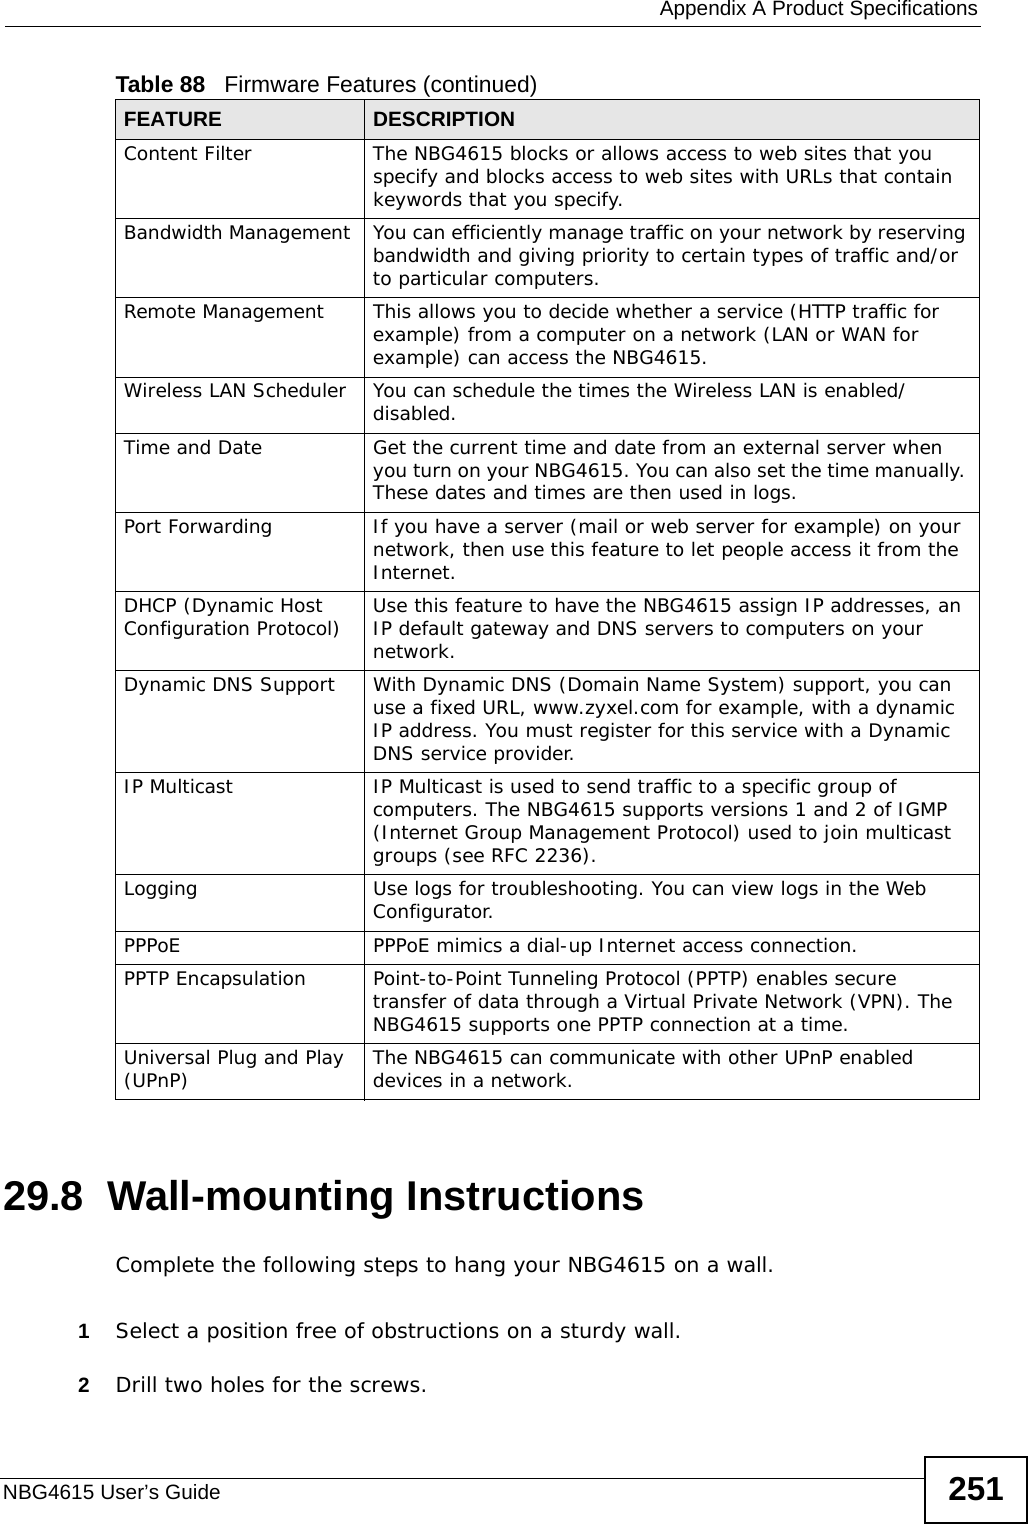  Appendix A Product SpecificationsNBG4615 User’s Guide 25129.8  Wall-mounting InstructionsComplete the following steps to hang your NBG4615 on a wall.1Select a position free of obstructions on a sturdy wall. 2Drill two holes for the screws. Content Filter The NBG4615 blocks or allows access to web sites that you specify and blocks access to web sites with URLs that contain keywords that you specify. Bandwidth Management  You can efficiently manage traffic on your network by reserving bandwidth and giving priority to certain types of traffic and/or to particular computers.Remote Management This allows you to decide whether a service (HTTP traffic for example) from a computer on a network (LAN or WAN for example) can access the NBG4615.Wireless LAN Scheduler You can schedule the times the Wireless LAN is enabled/disabled.Time and Date Get the current time and date from an external server when you turn on your NBG4615. You can also set the time manually. These dates and times are then used in logs.Port Forwarding If you have a server (mail or web server for example) on your network, then use this feature to let people access it from the Internet.DHCP (Dynamic Host Configuration Protocol) Use this feature to have the NBG4615 assign IP addresses, an IP default gateway and DNS servers to computers on your network.Dynamic DNS Support With Dynamic DNS (Domain Name System) support, you can use a fixed URL, www.zyxel.com for example, with a dynamic IP address. You must register for this service with a Dynamic DNS service provider.IP Multicast IP Multicast is used to send traffic to a specific group of computers. The NBG4615 supports versions 1 and 2 of IGMP (Internet Group Management Protocol) used to join multicast groups (see RFC 2236).Logging Use logs for troubleshooting. You can view logs in the Web Configurator.PPPoE PPPoE mimics a dial-up Internet access connection.PPTP Encapsulation Point-to-Point Tunneling Protocol (PPTP) enables secure transfer of data through a Virtual Private Network (VPN). The NBG4615 supports one PPTP connection at a time.Universal Plug and Play (UPnP) The NBG4615 can communicate with other UPnP enabled devices in a network. Table 88   Firmware Features (continued)FEATURE DESCRIPTION